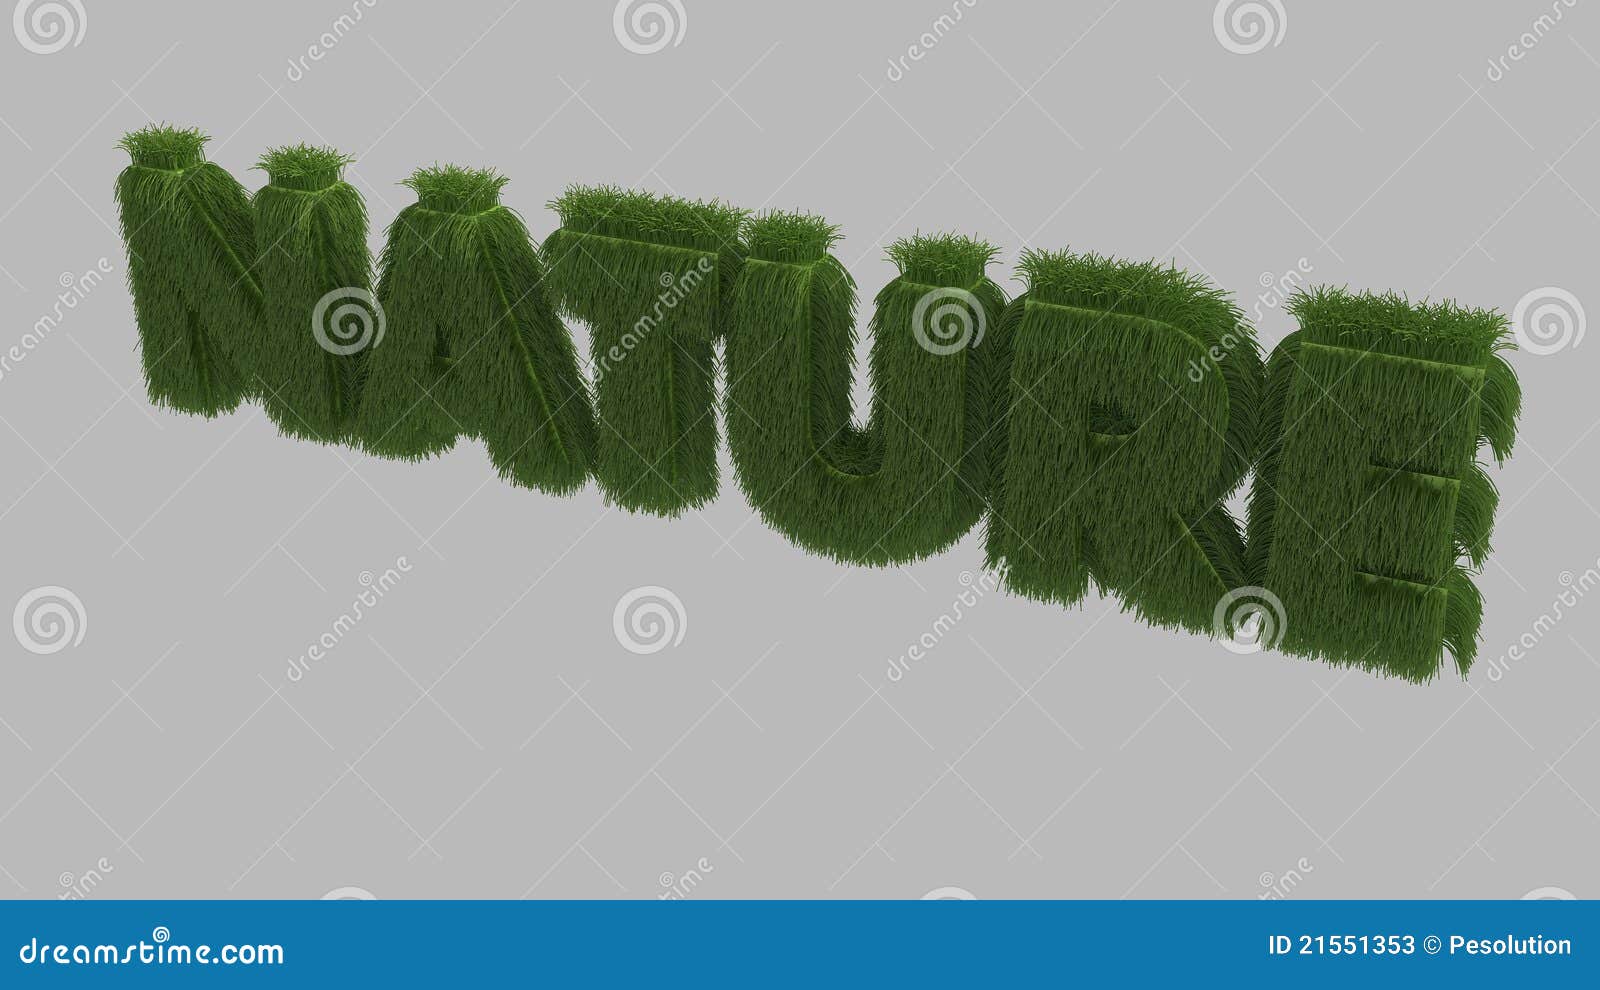 Nature text stock Illustration of text -